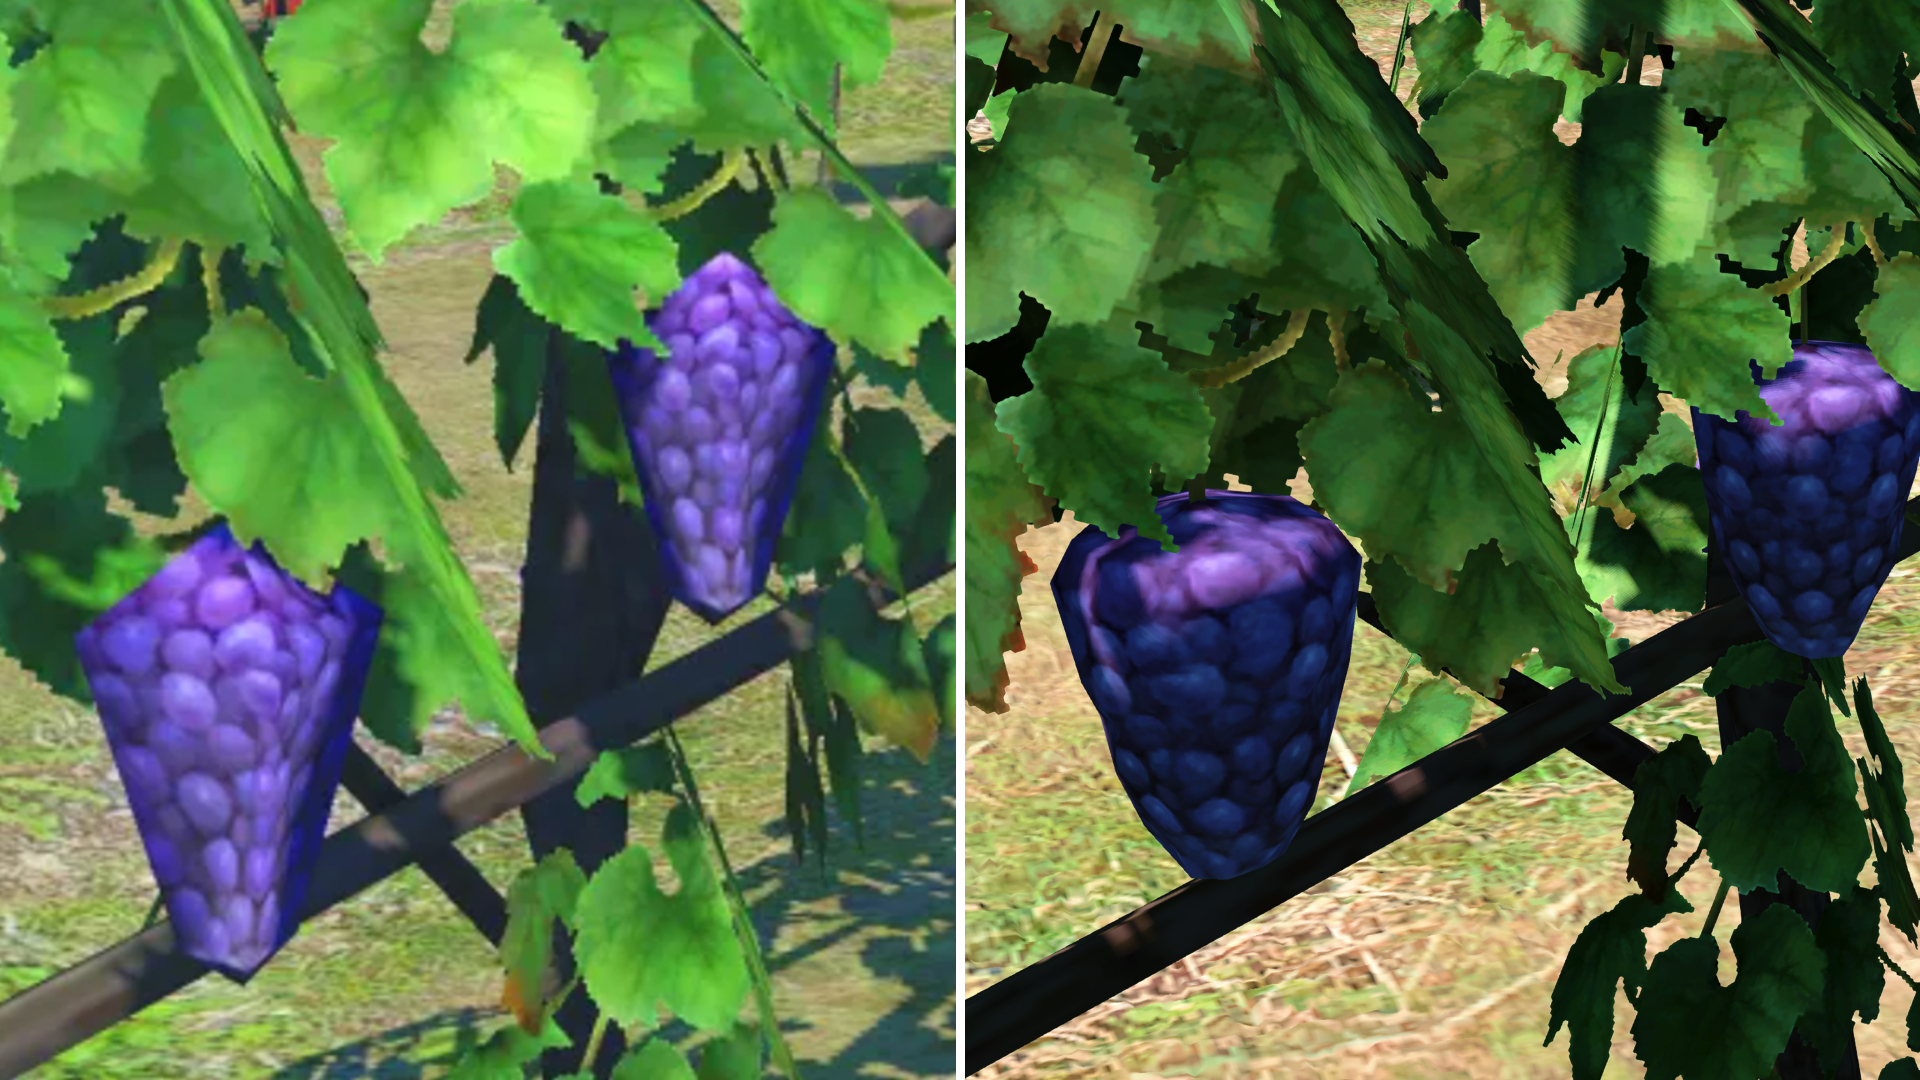 A before and after of Endwalker's grapes.